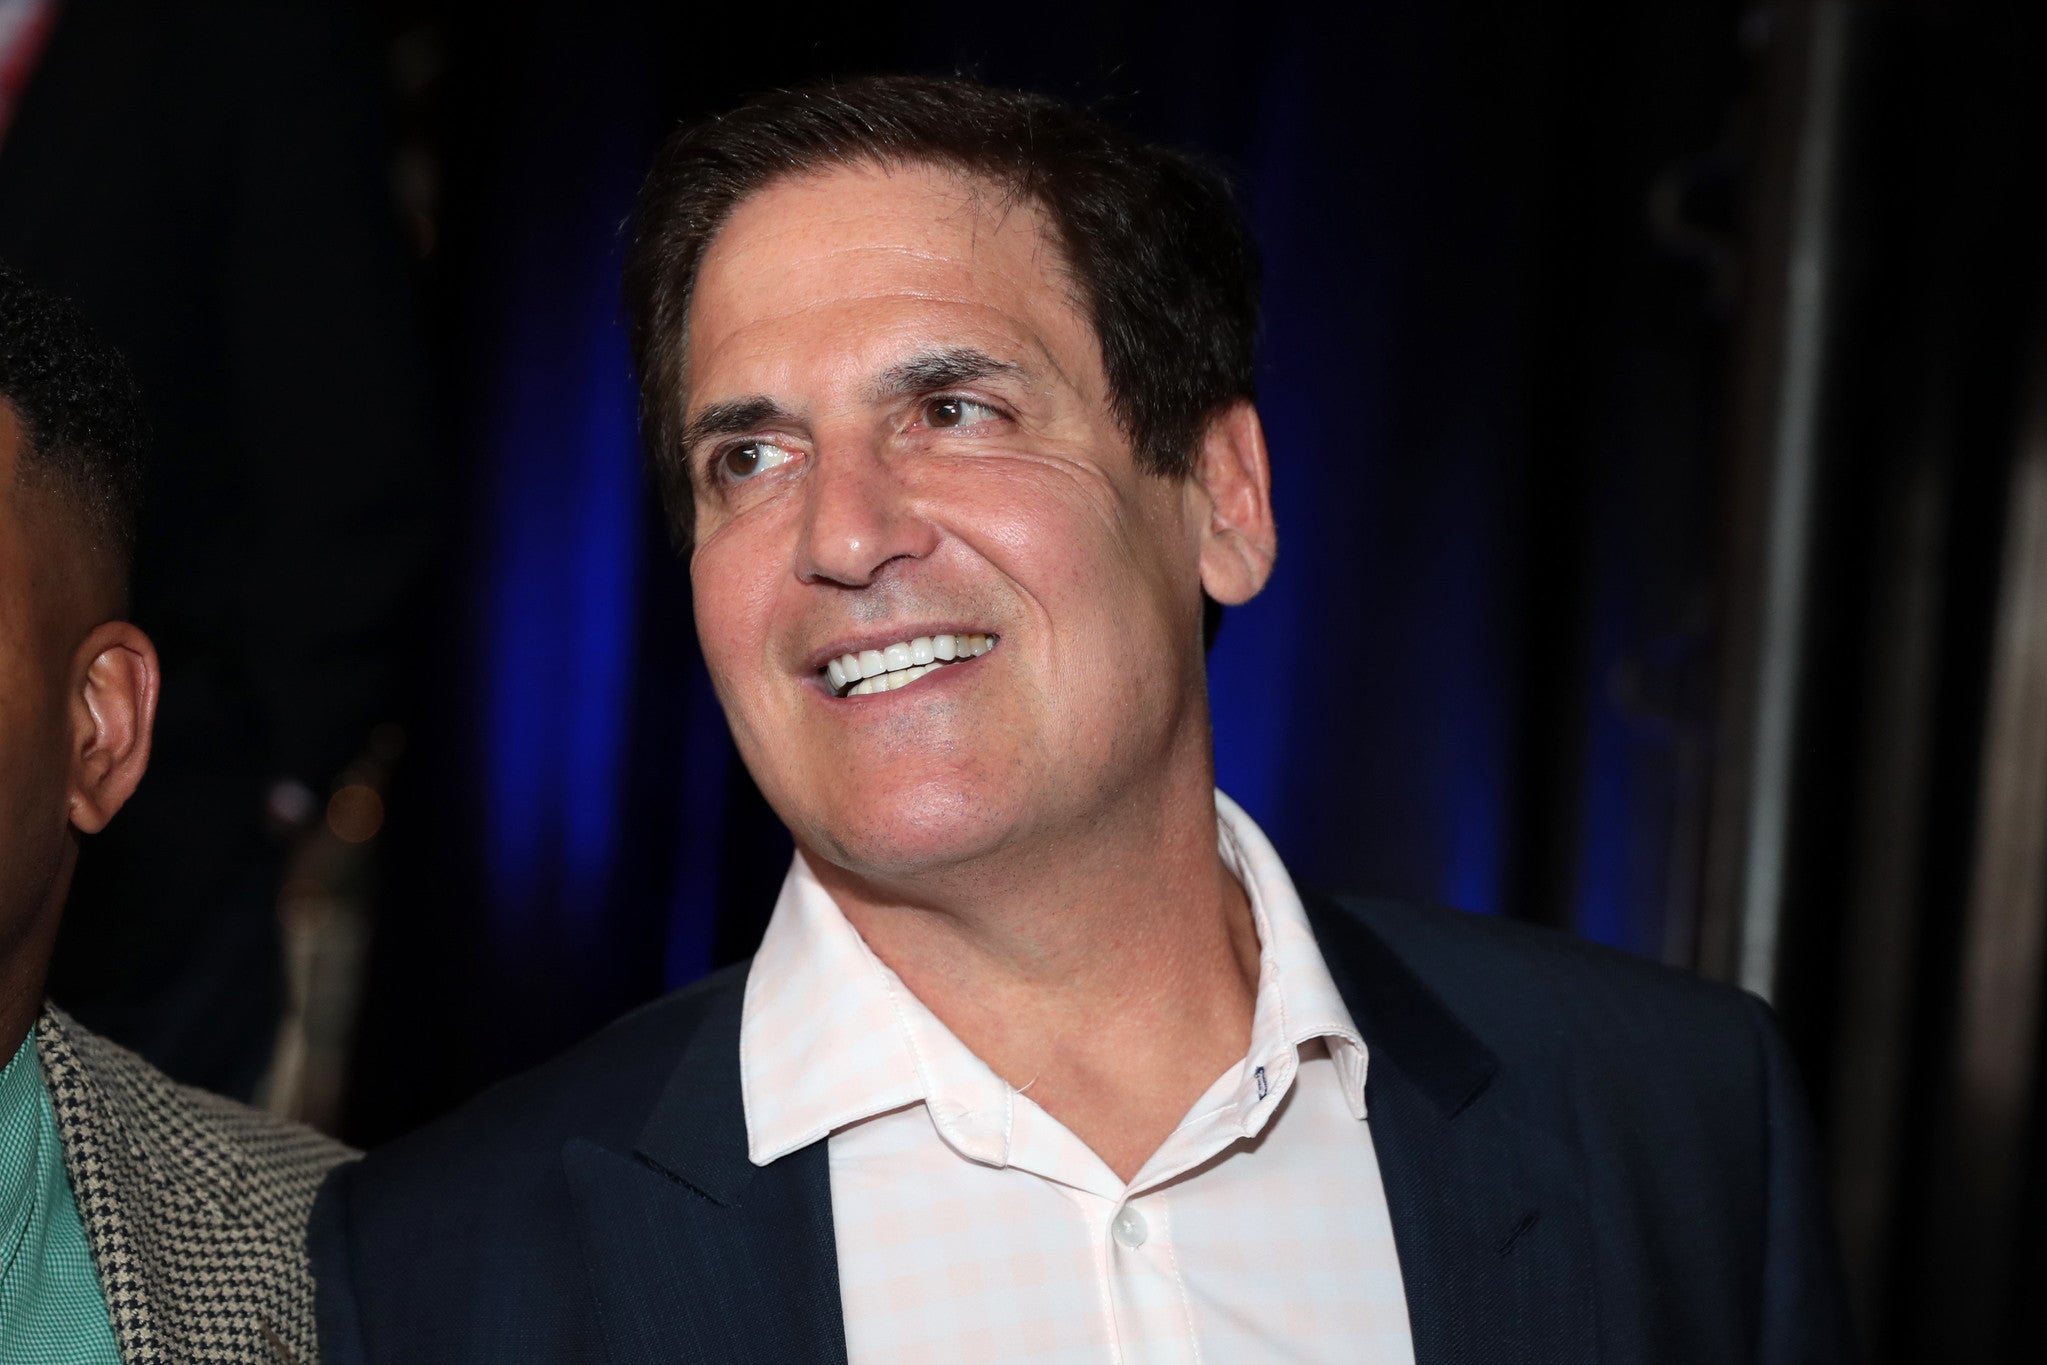 mark cuban invests in bitcoin